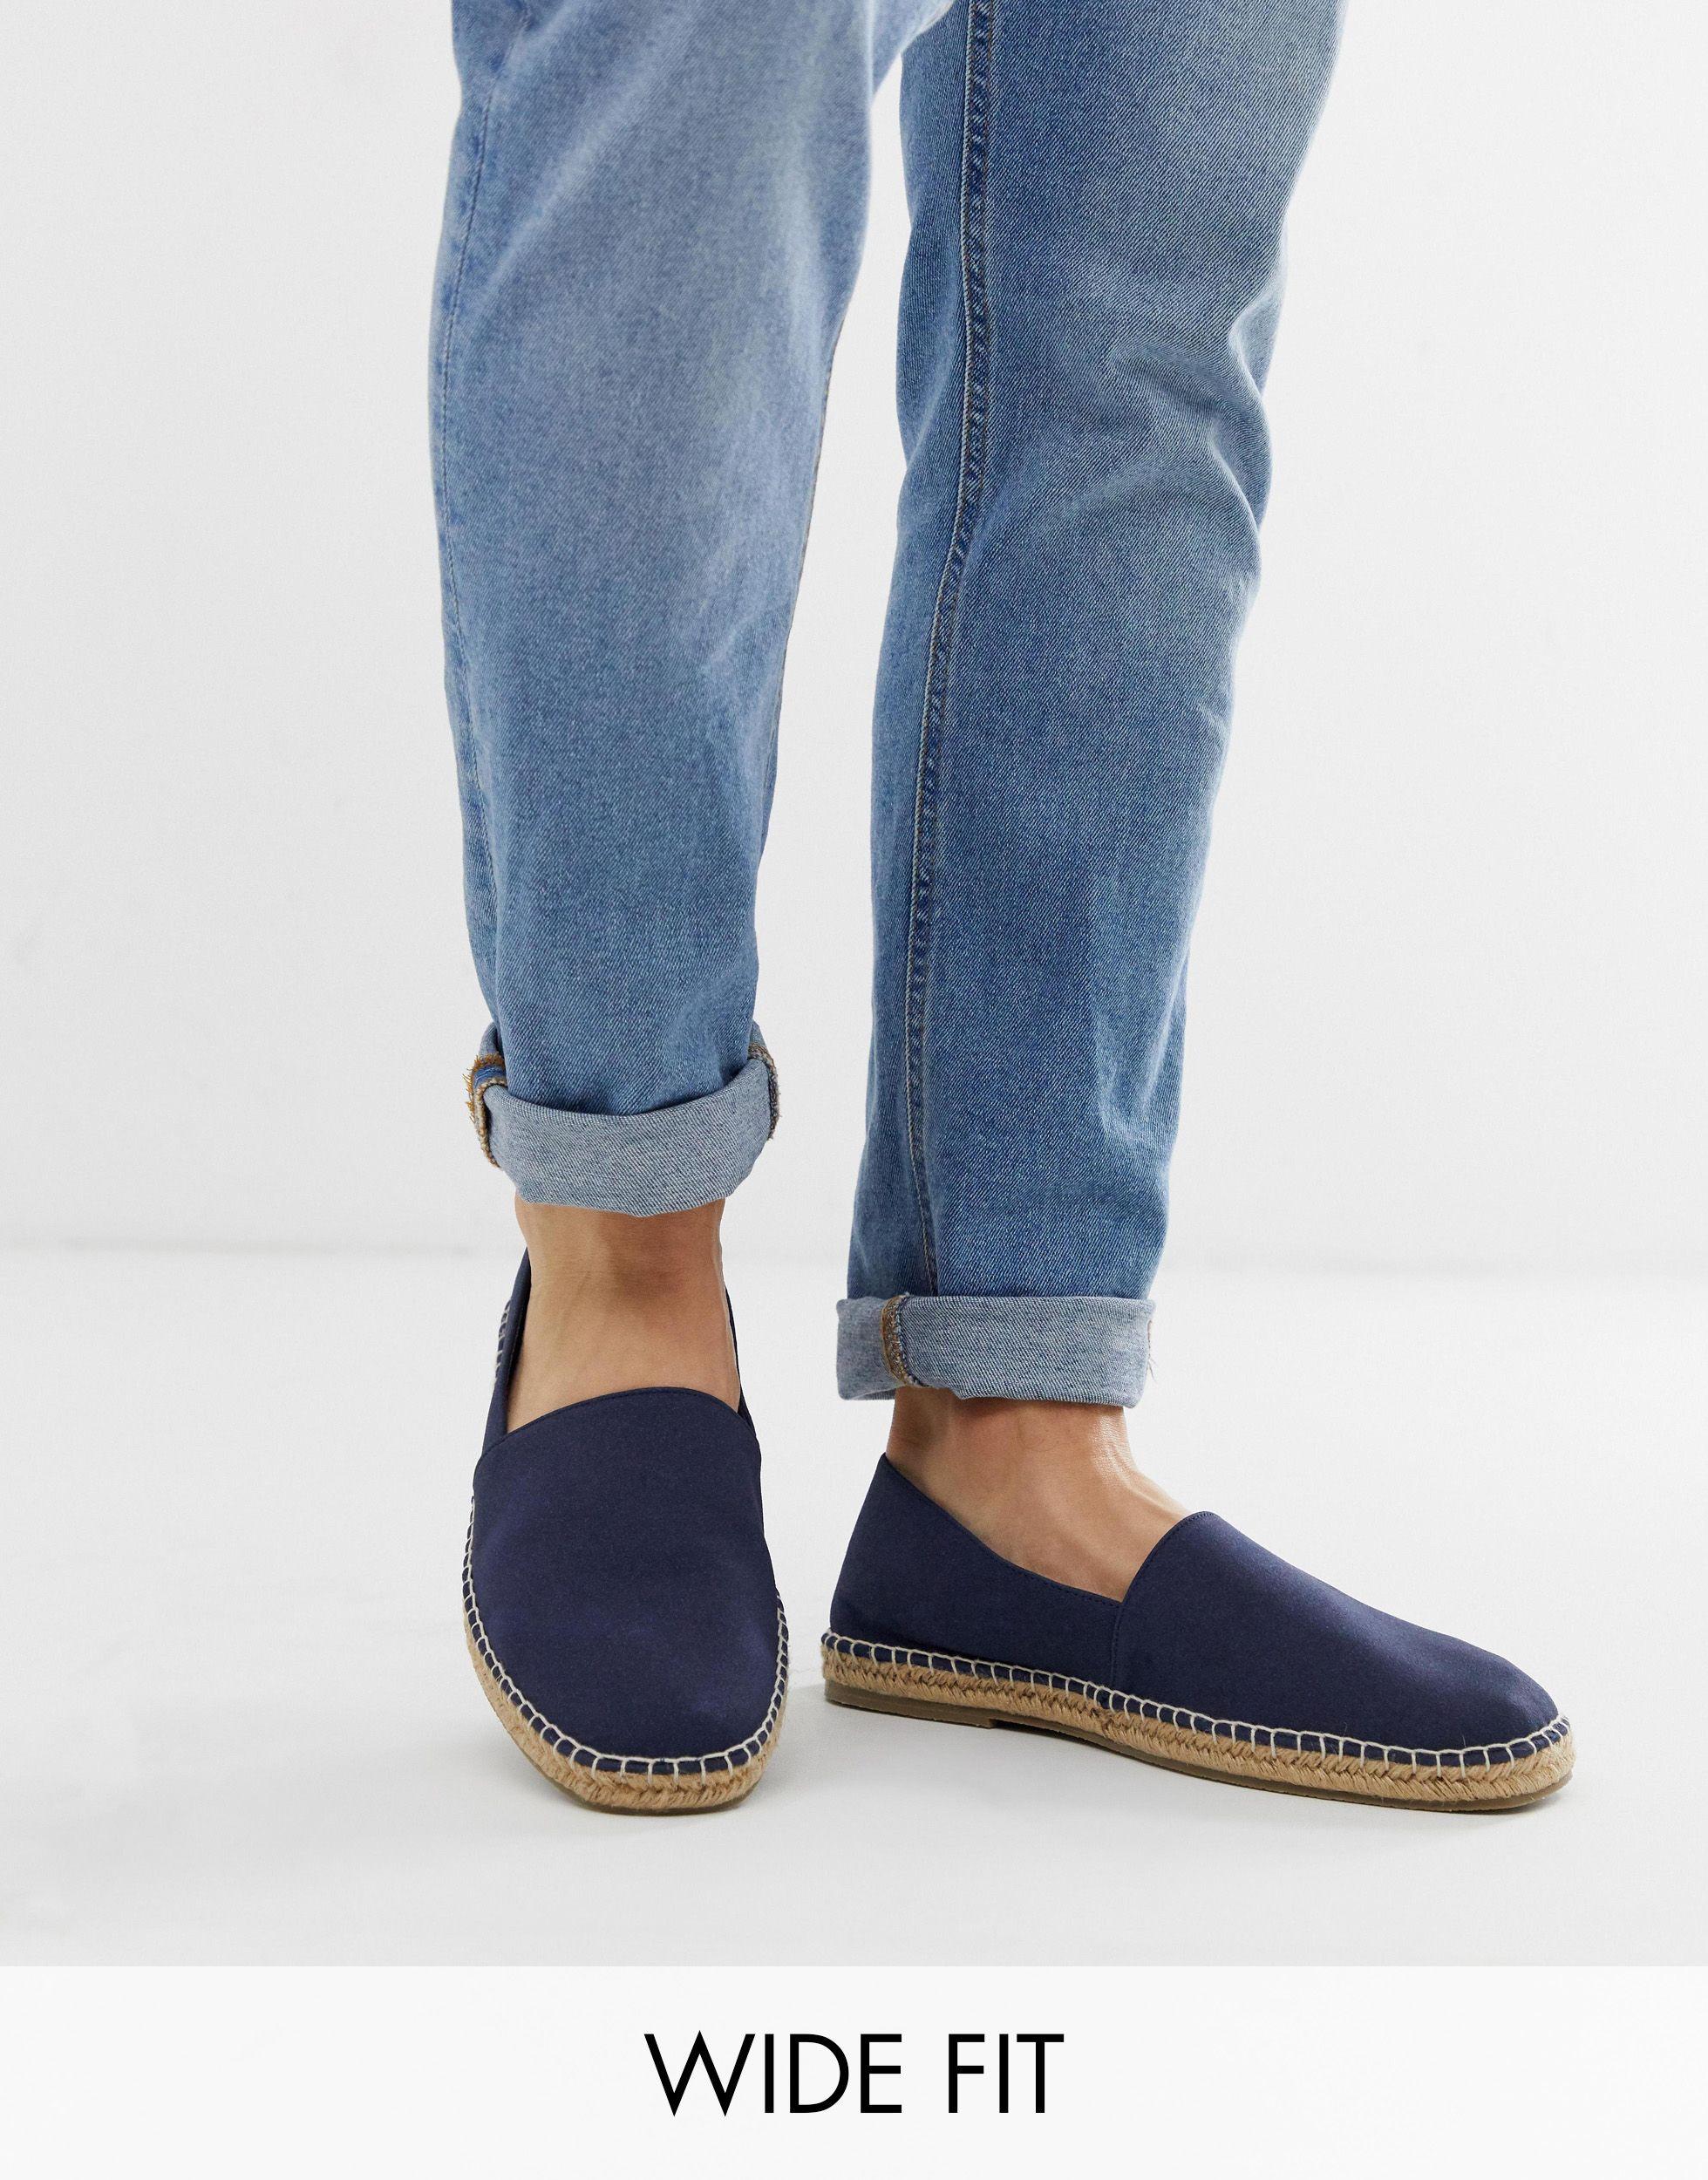 ASOS Canvas Wide Fit Square Toe Espadrilles in Navy (Blue) for Men - Lyst